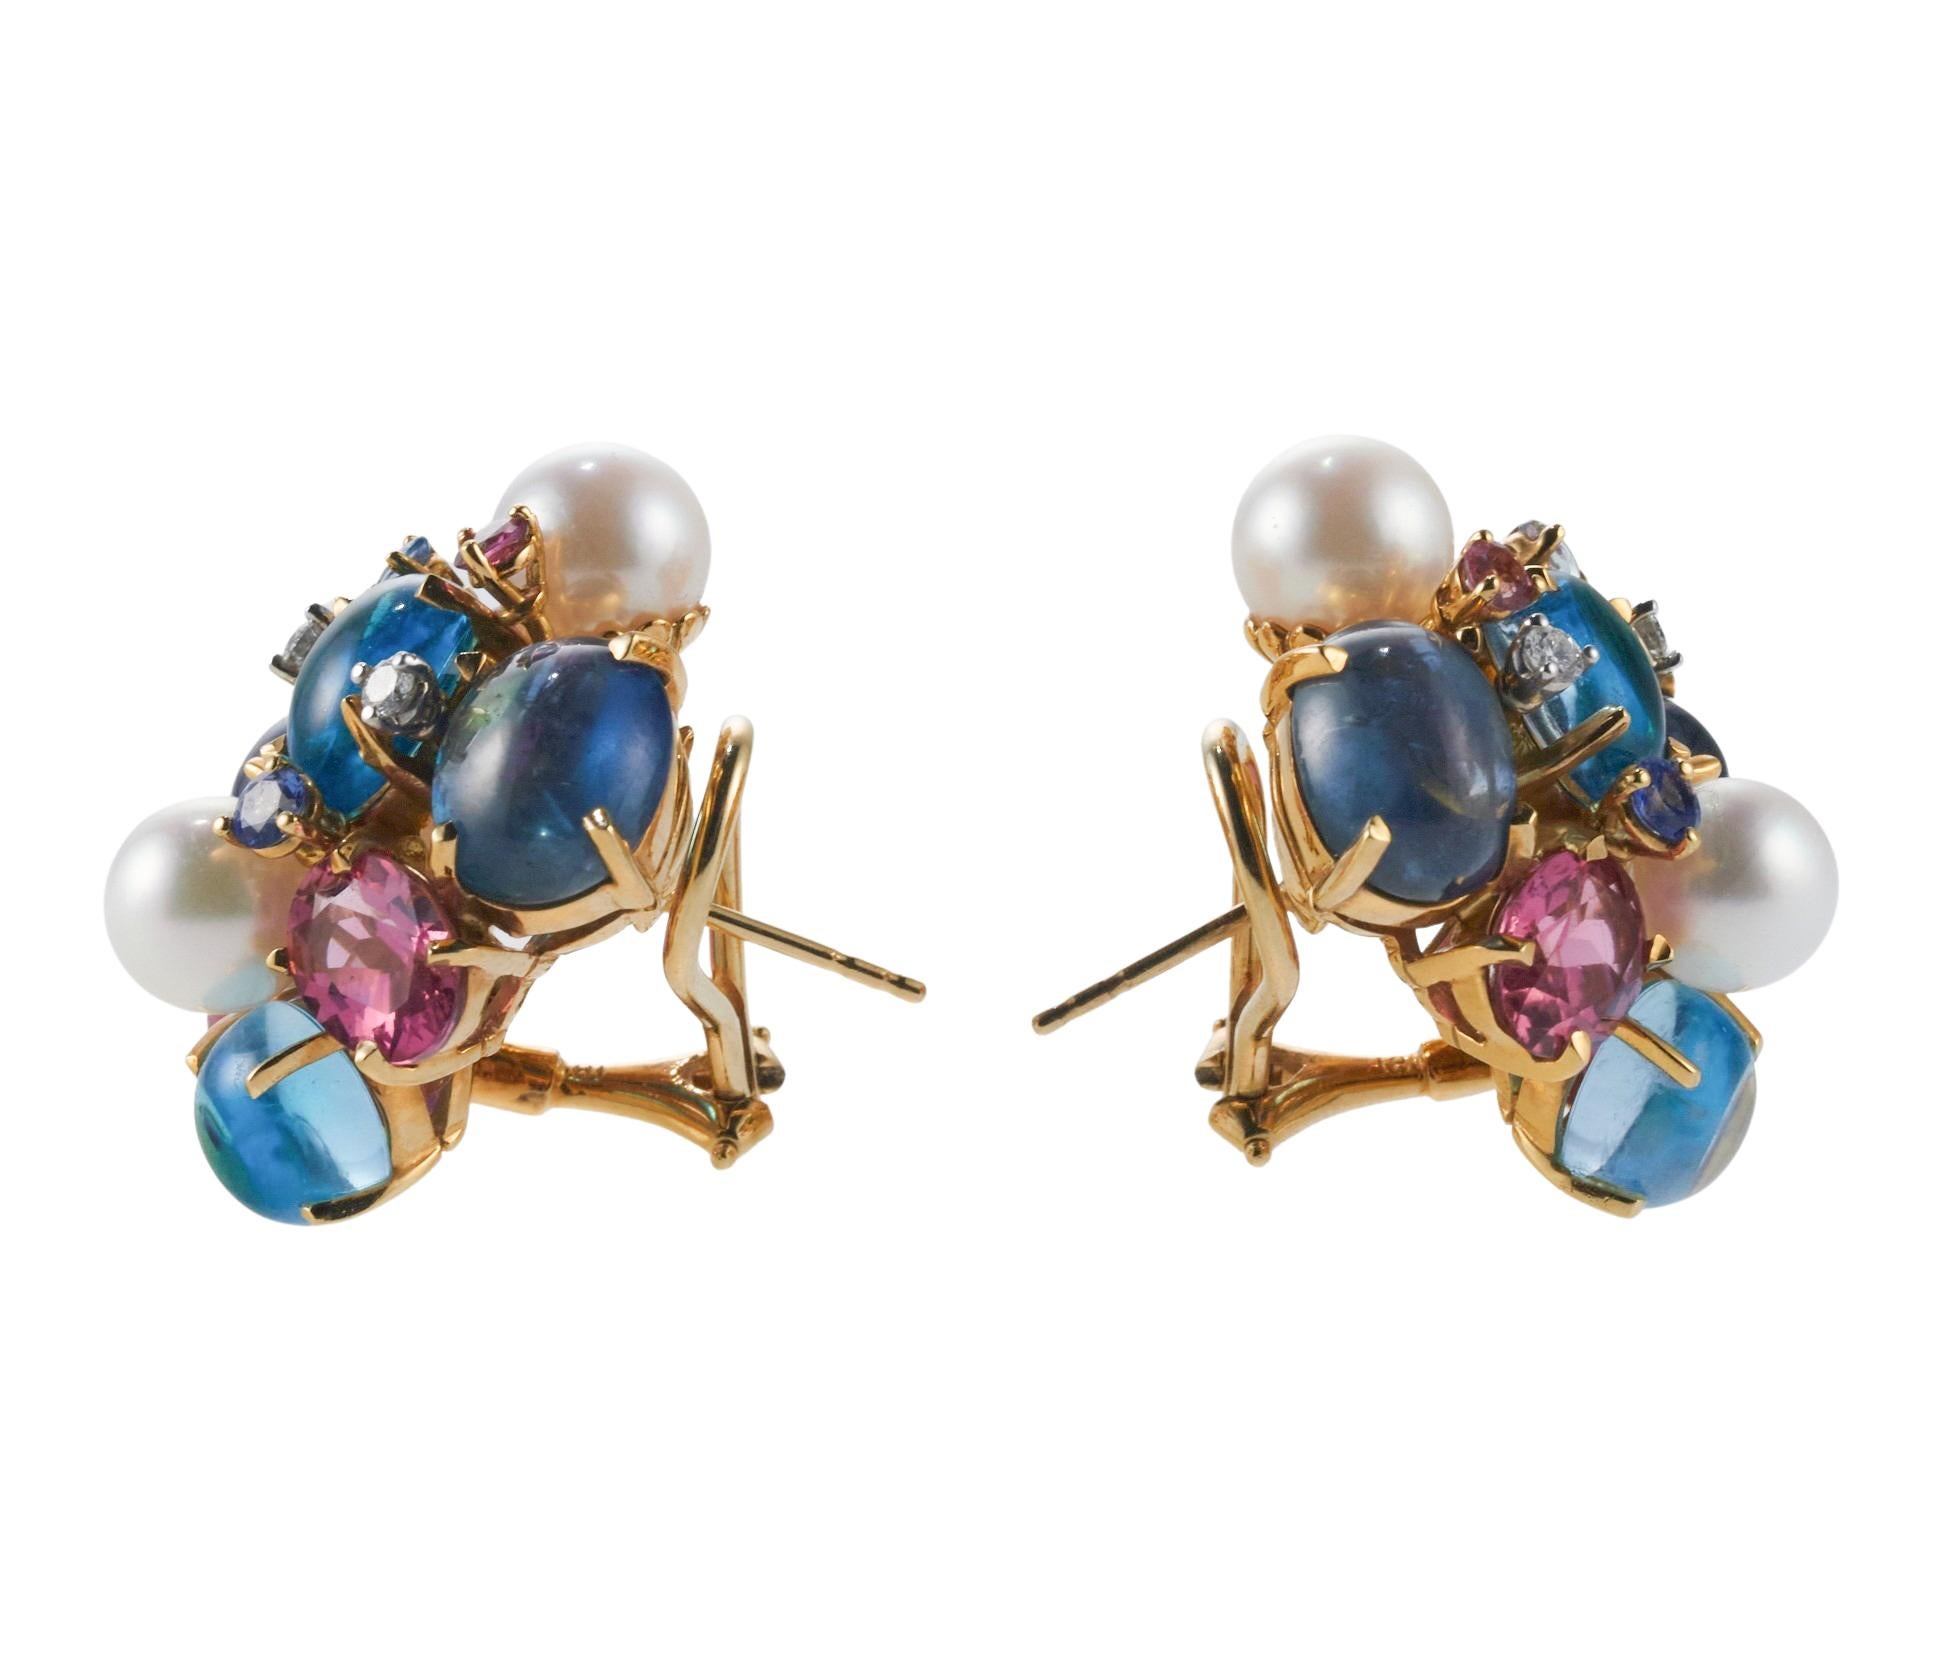 Pair of 18k gold Bubble collection earrings by Seaman Schepps, set with pearls, sapphires, topaz, tourmaline and approx. 0.24ctw in VS/G diamonds. Earrings measure 25mm x 25mm. Marked: Shell hallmark, 20224, 750. weight is 26.1 grams.